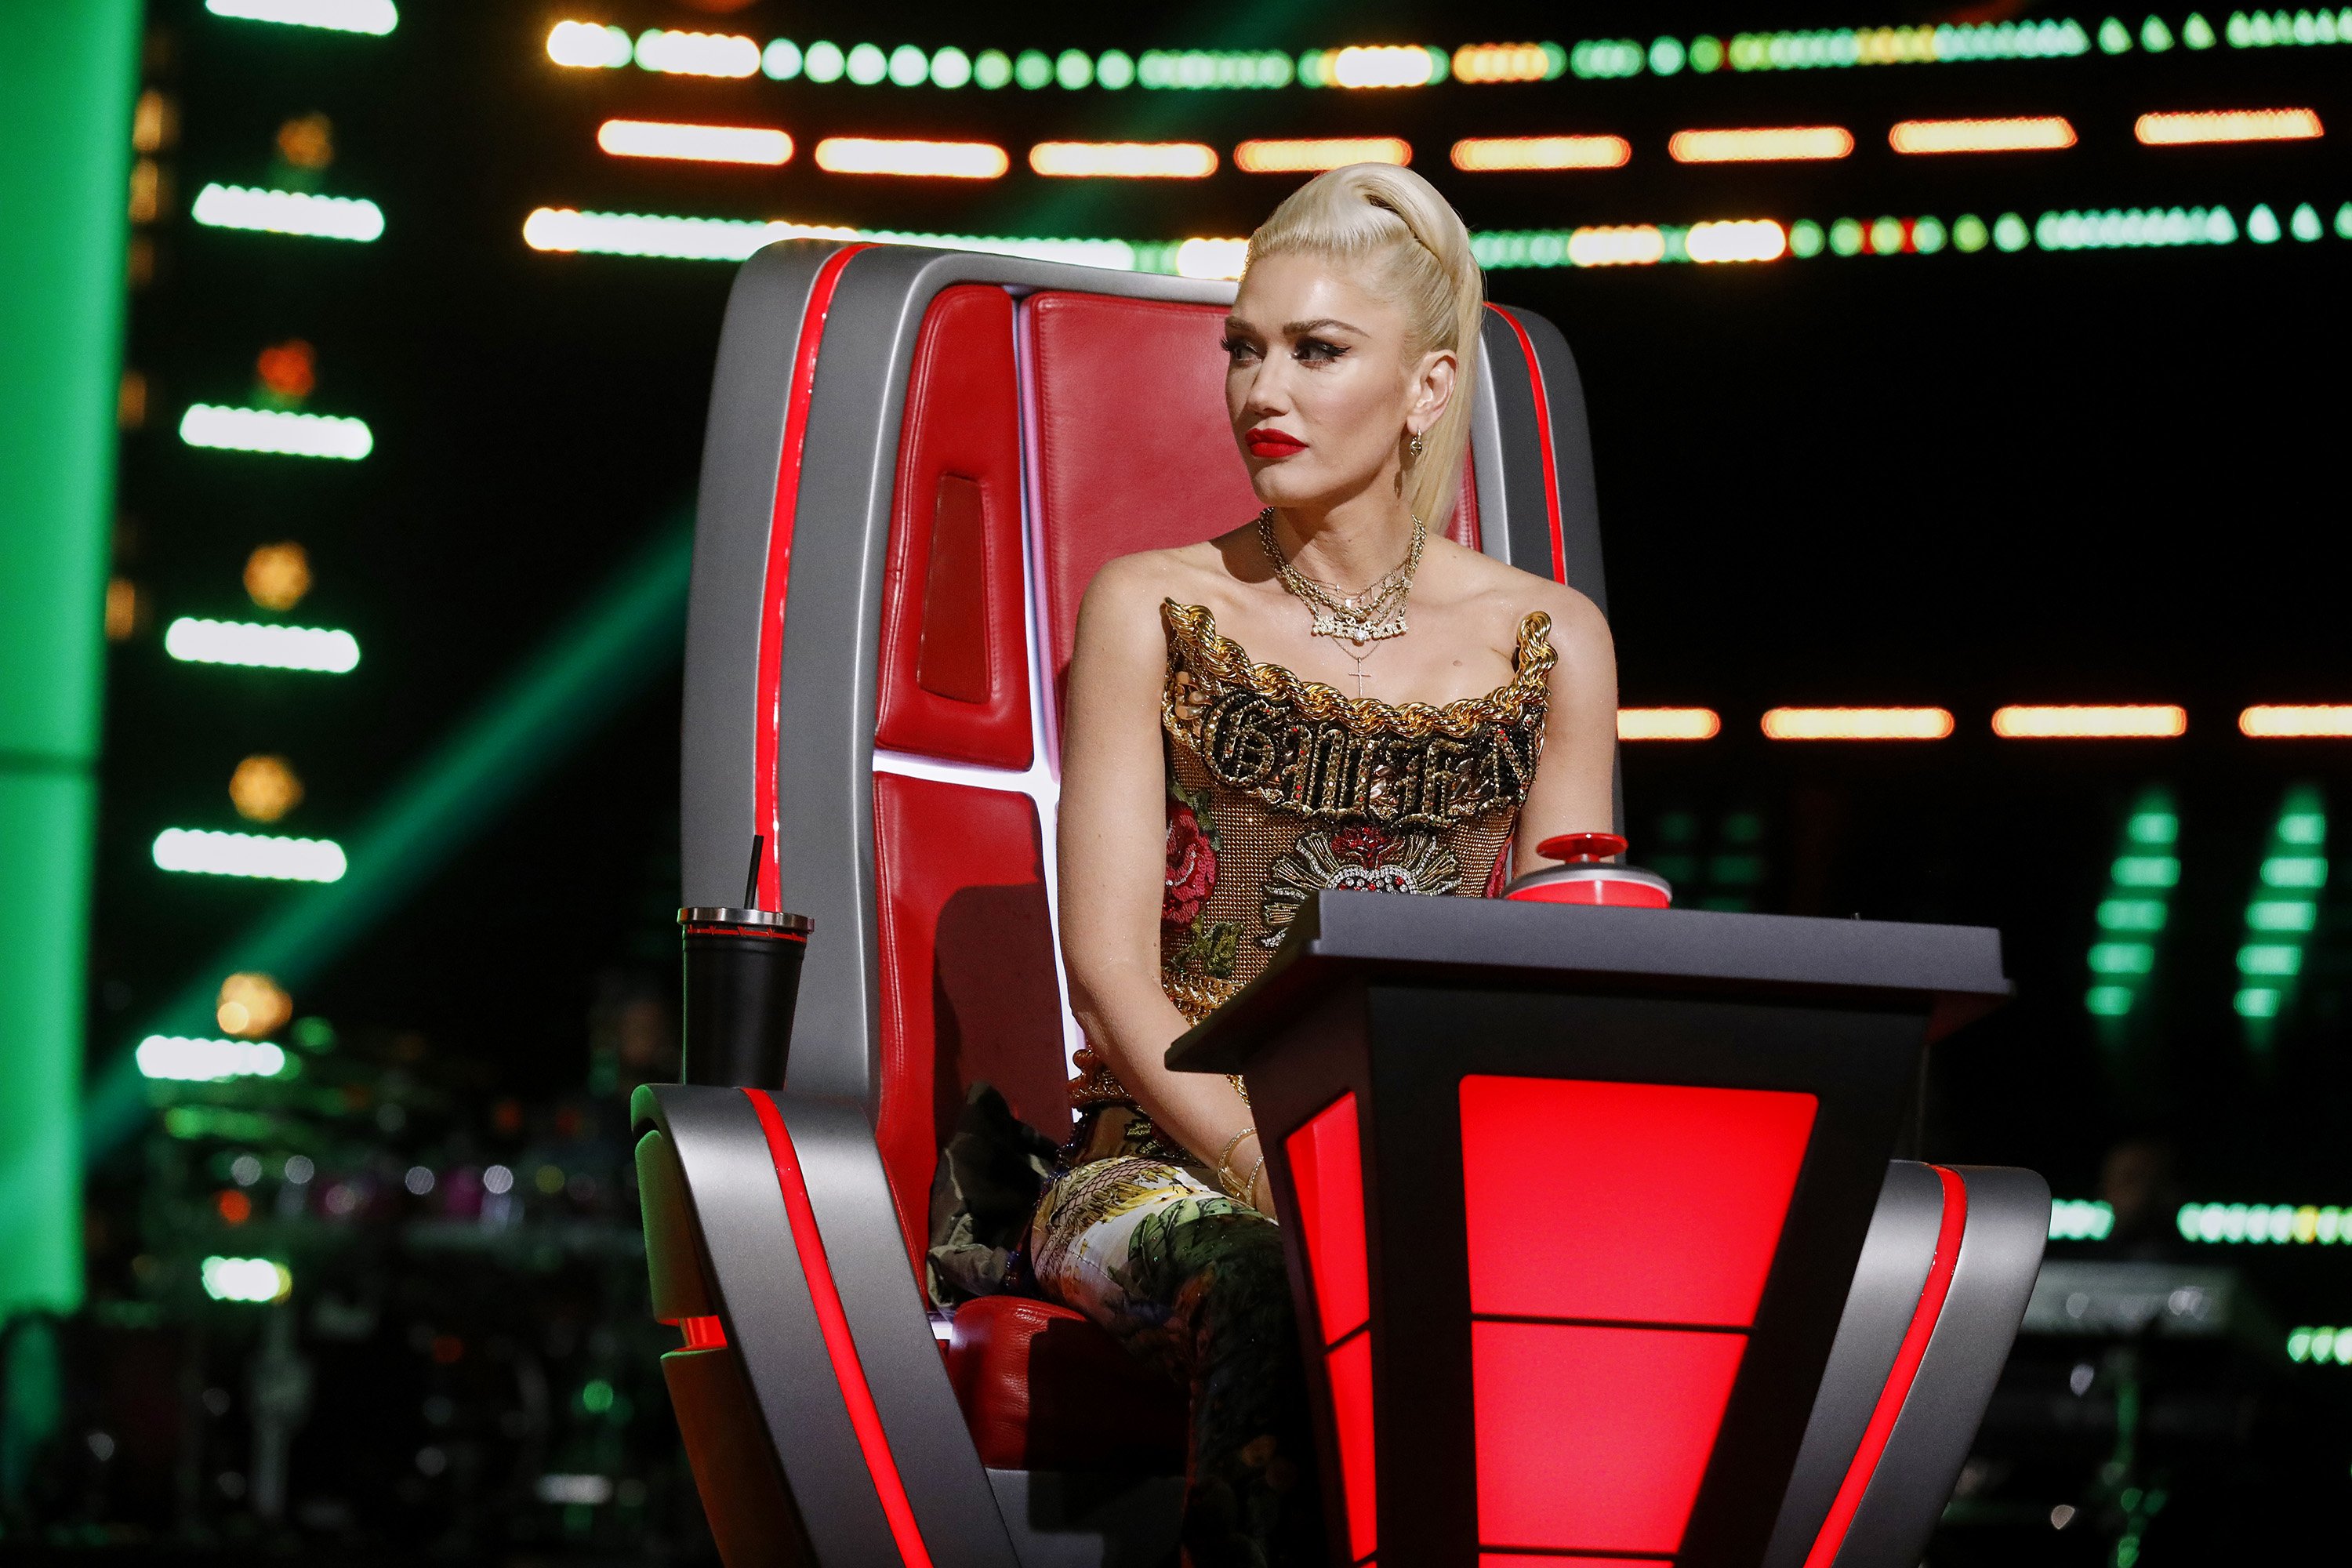 Gwen Stefani on "The Voice" in 2019 | Source: Getty Images